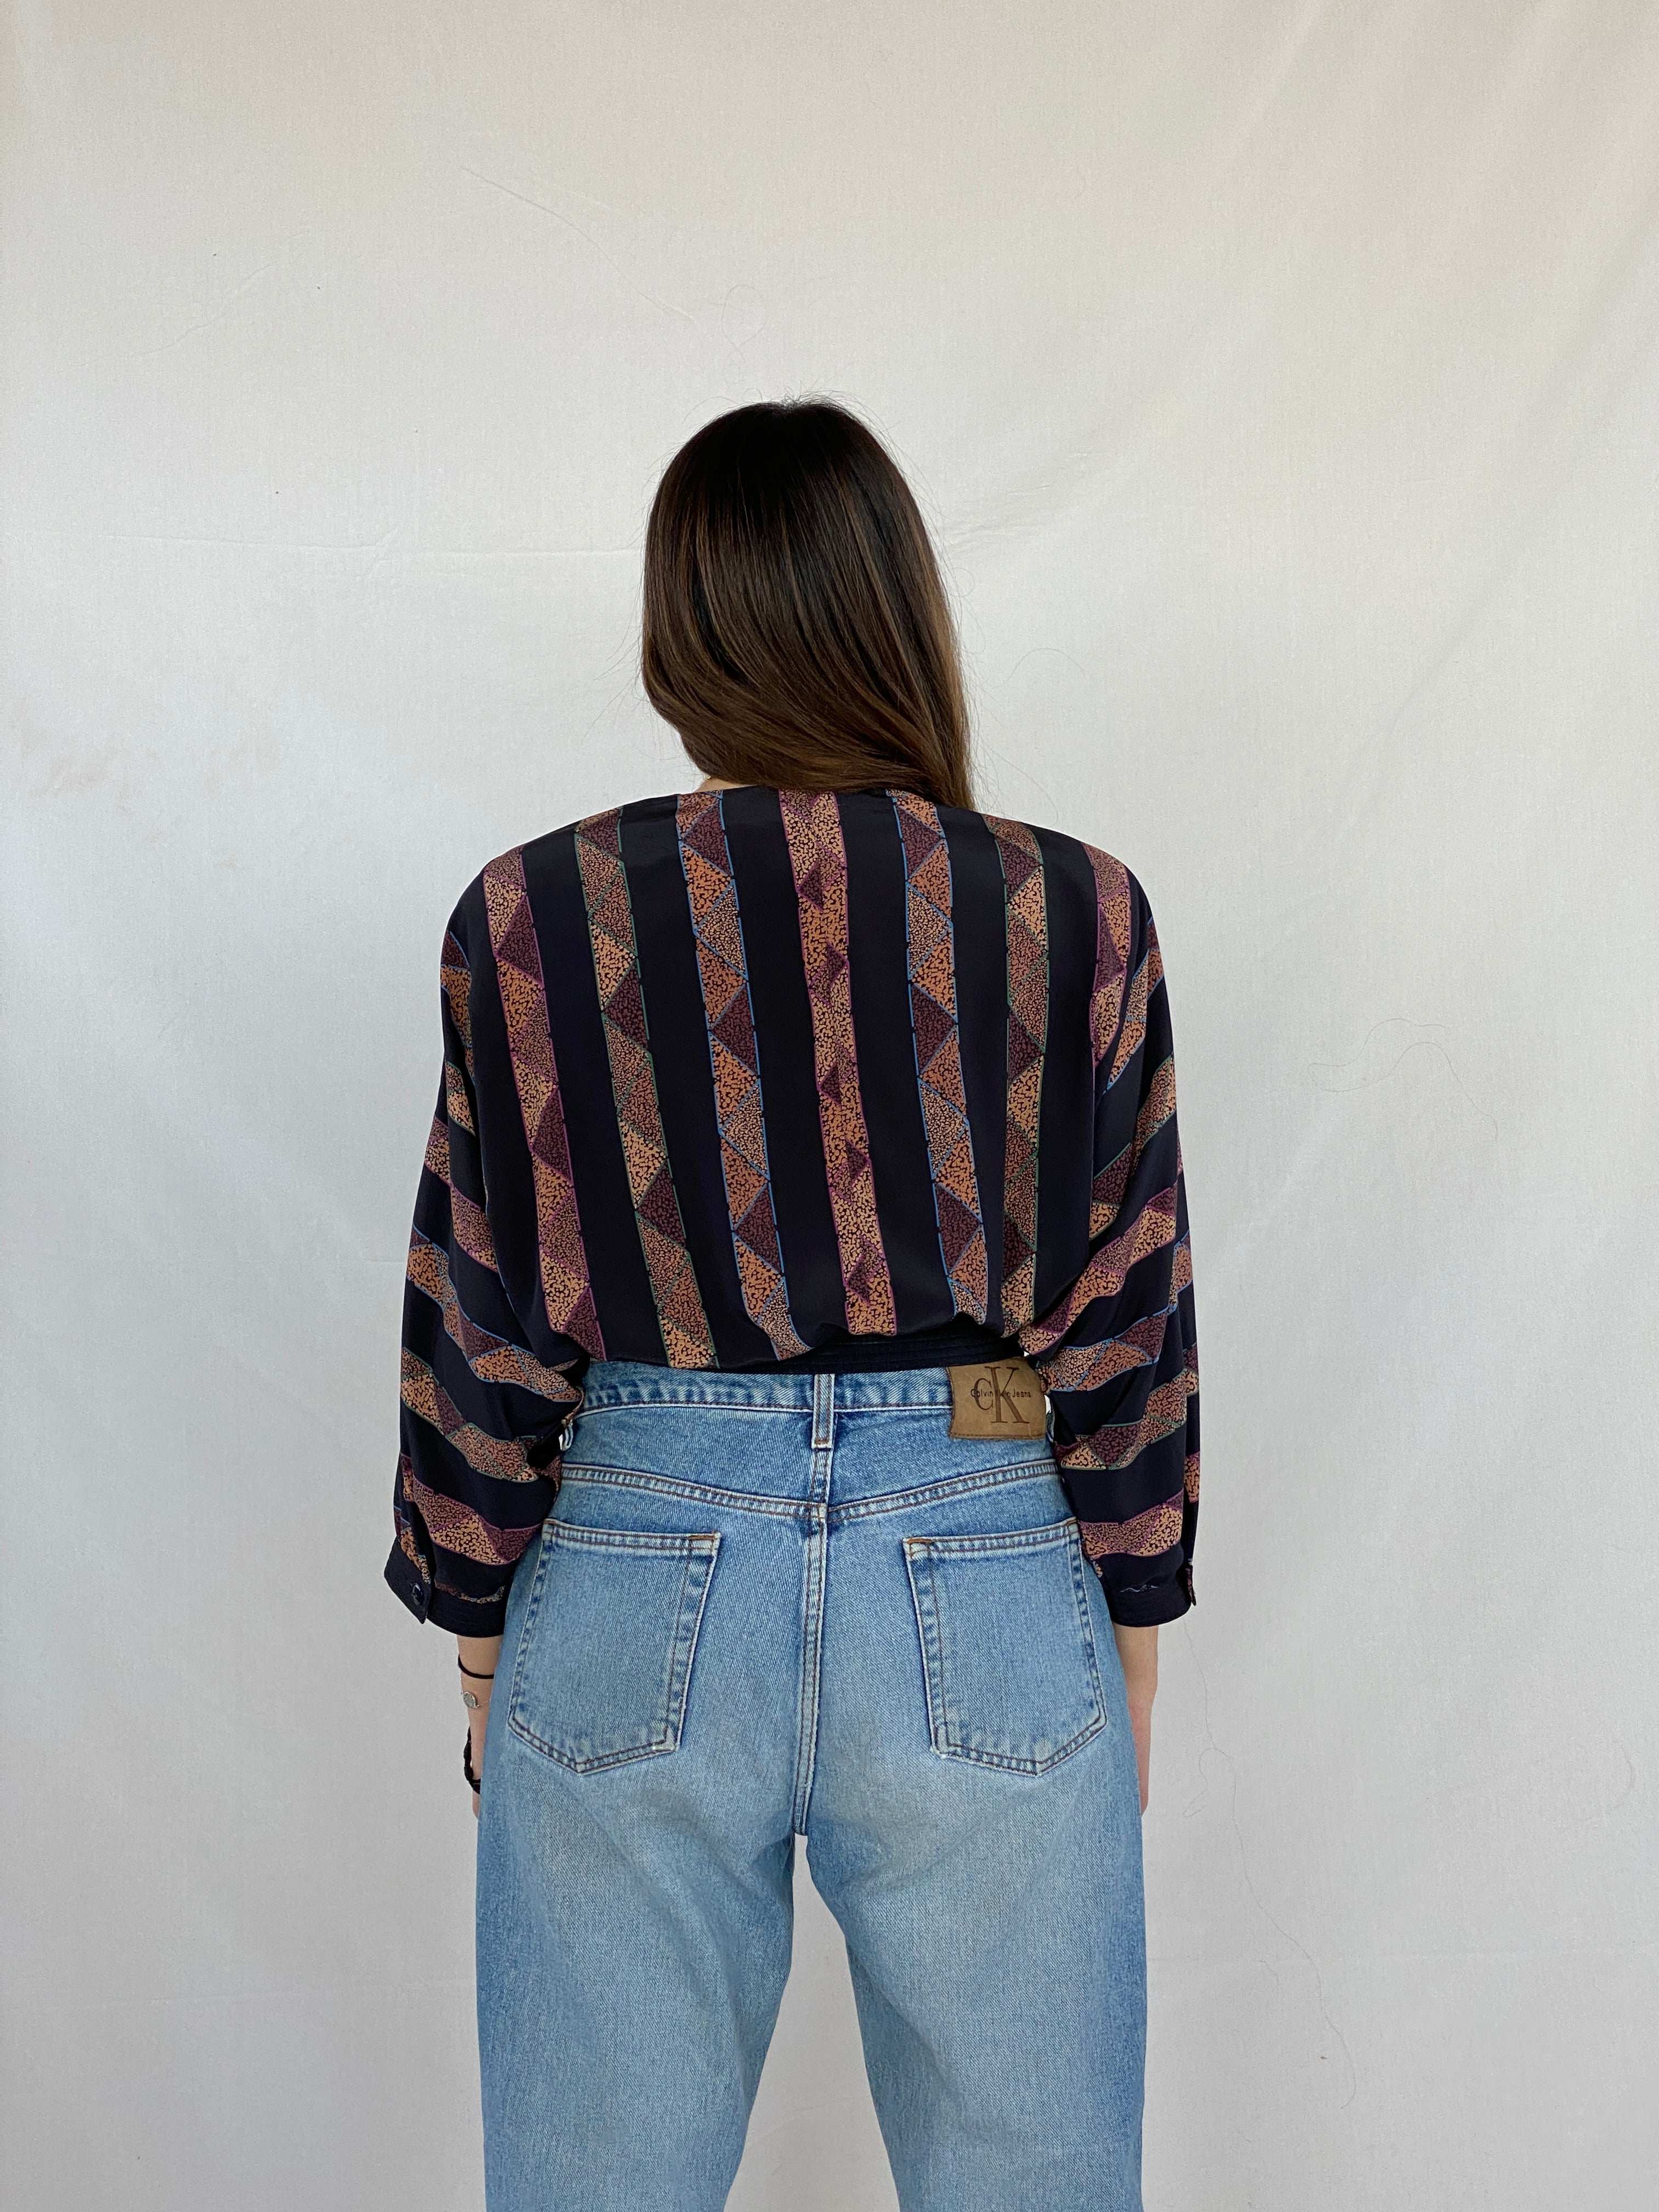 Vintage 90s Maggy Boutique Top - Balagan Vintage Full Sleeve Top 00s, 90s, full sleeve top, Juana, NEW IN